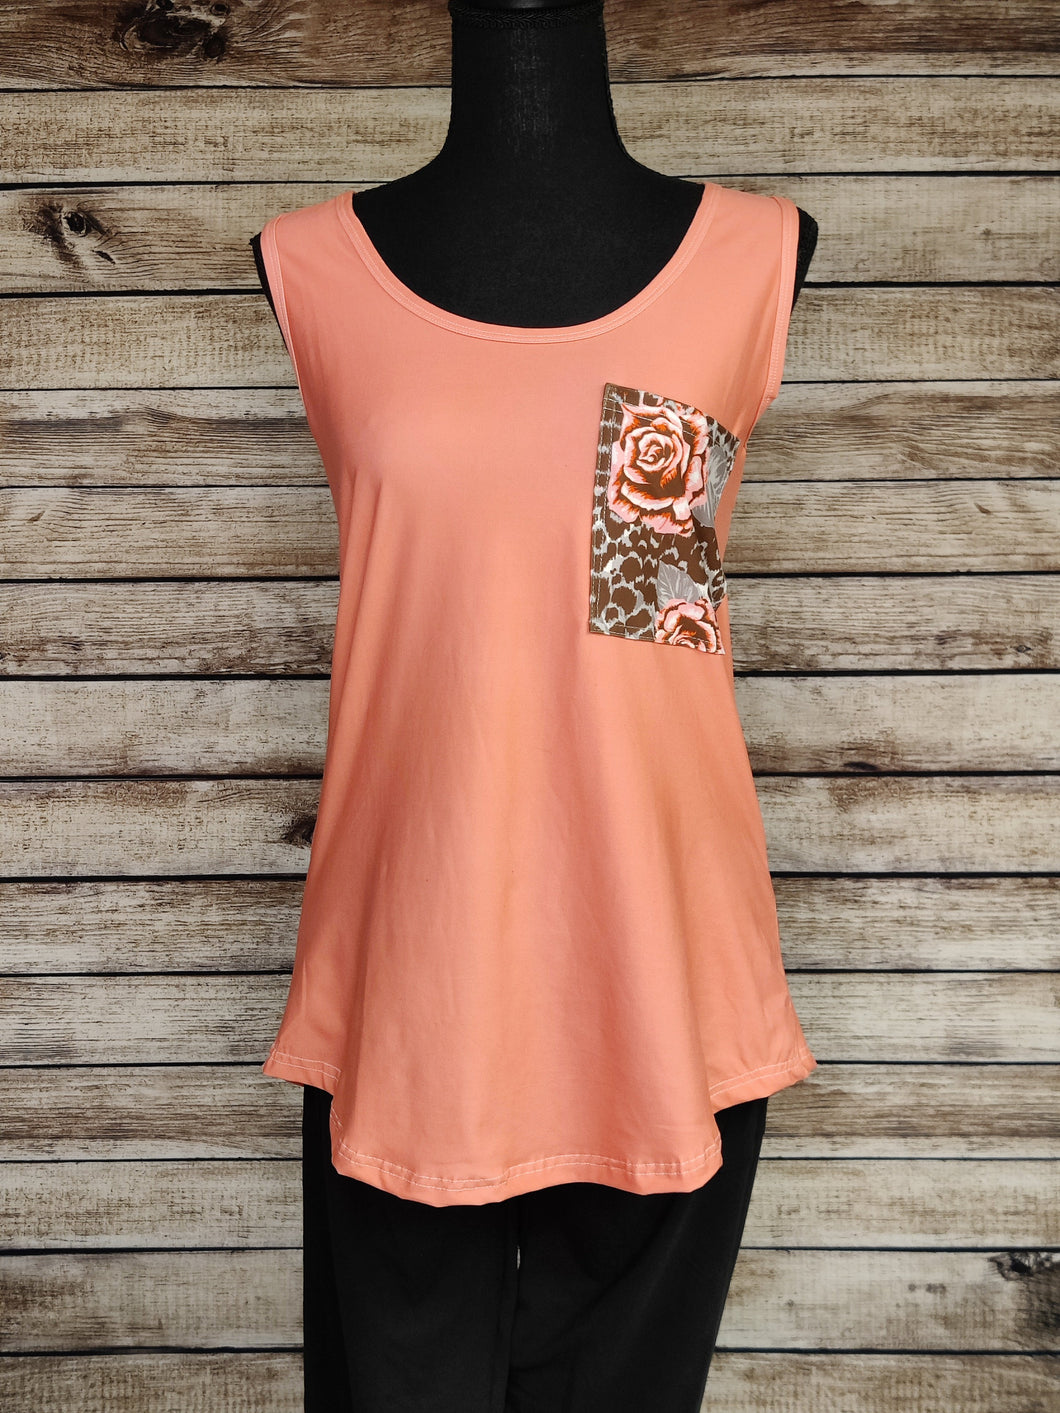 Custom Tank Top (Coral with Roses)